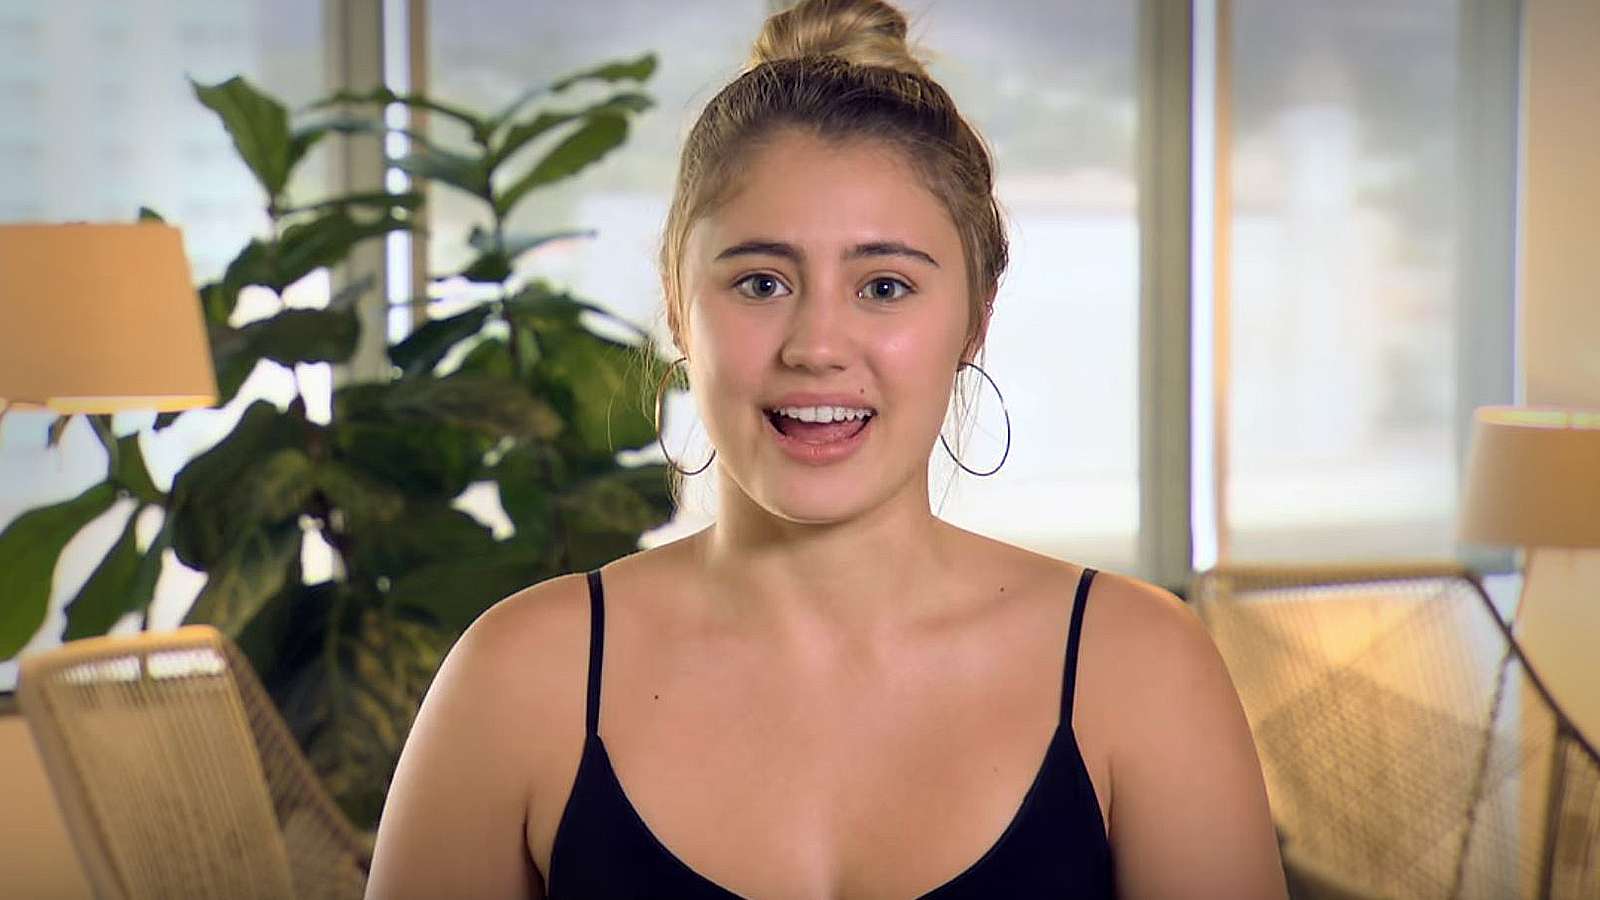 Lia Marie Johnson appearing in a YouTube video.